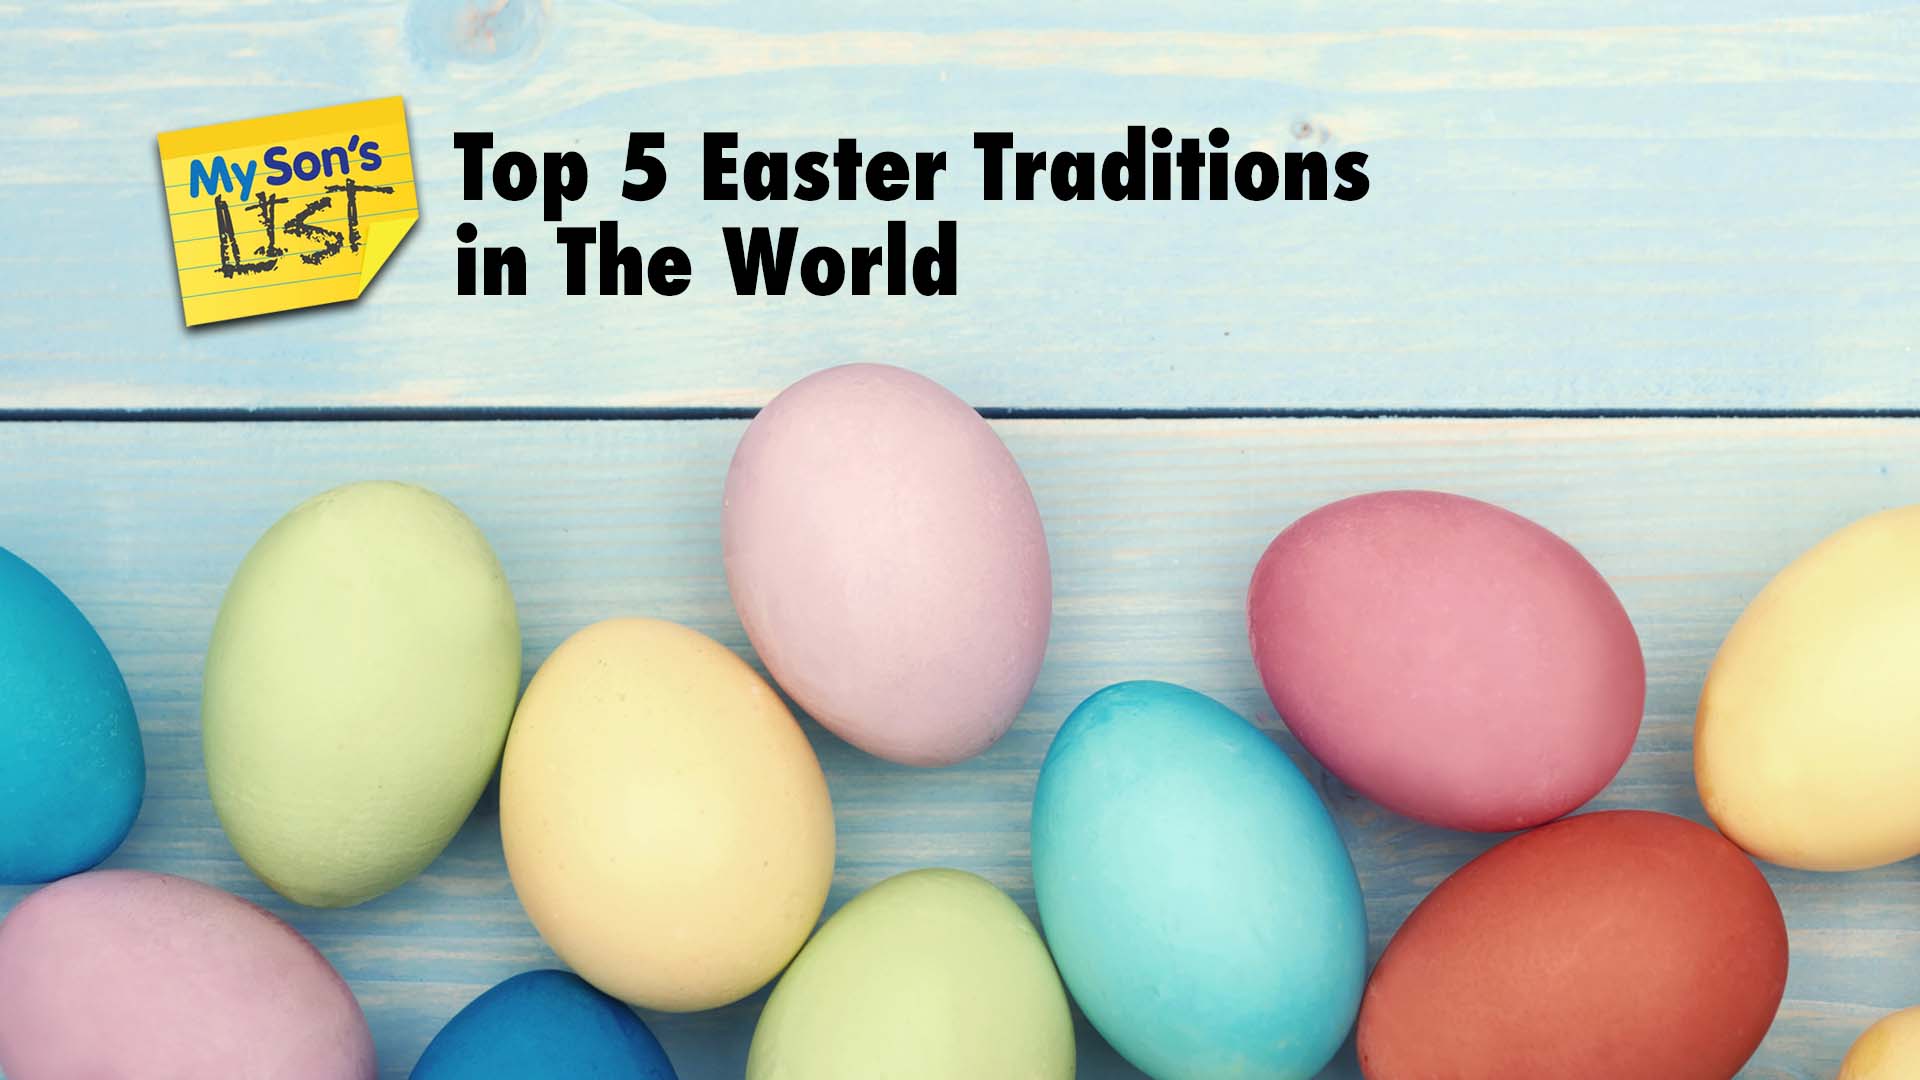 My Sons List of Top 5 Easter Traditions in The World